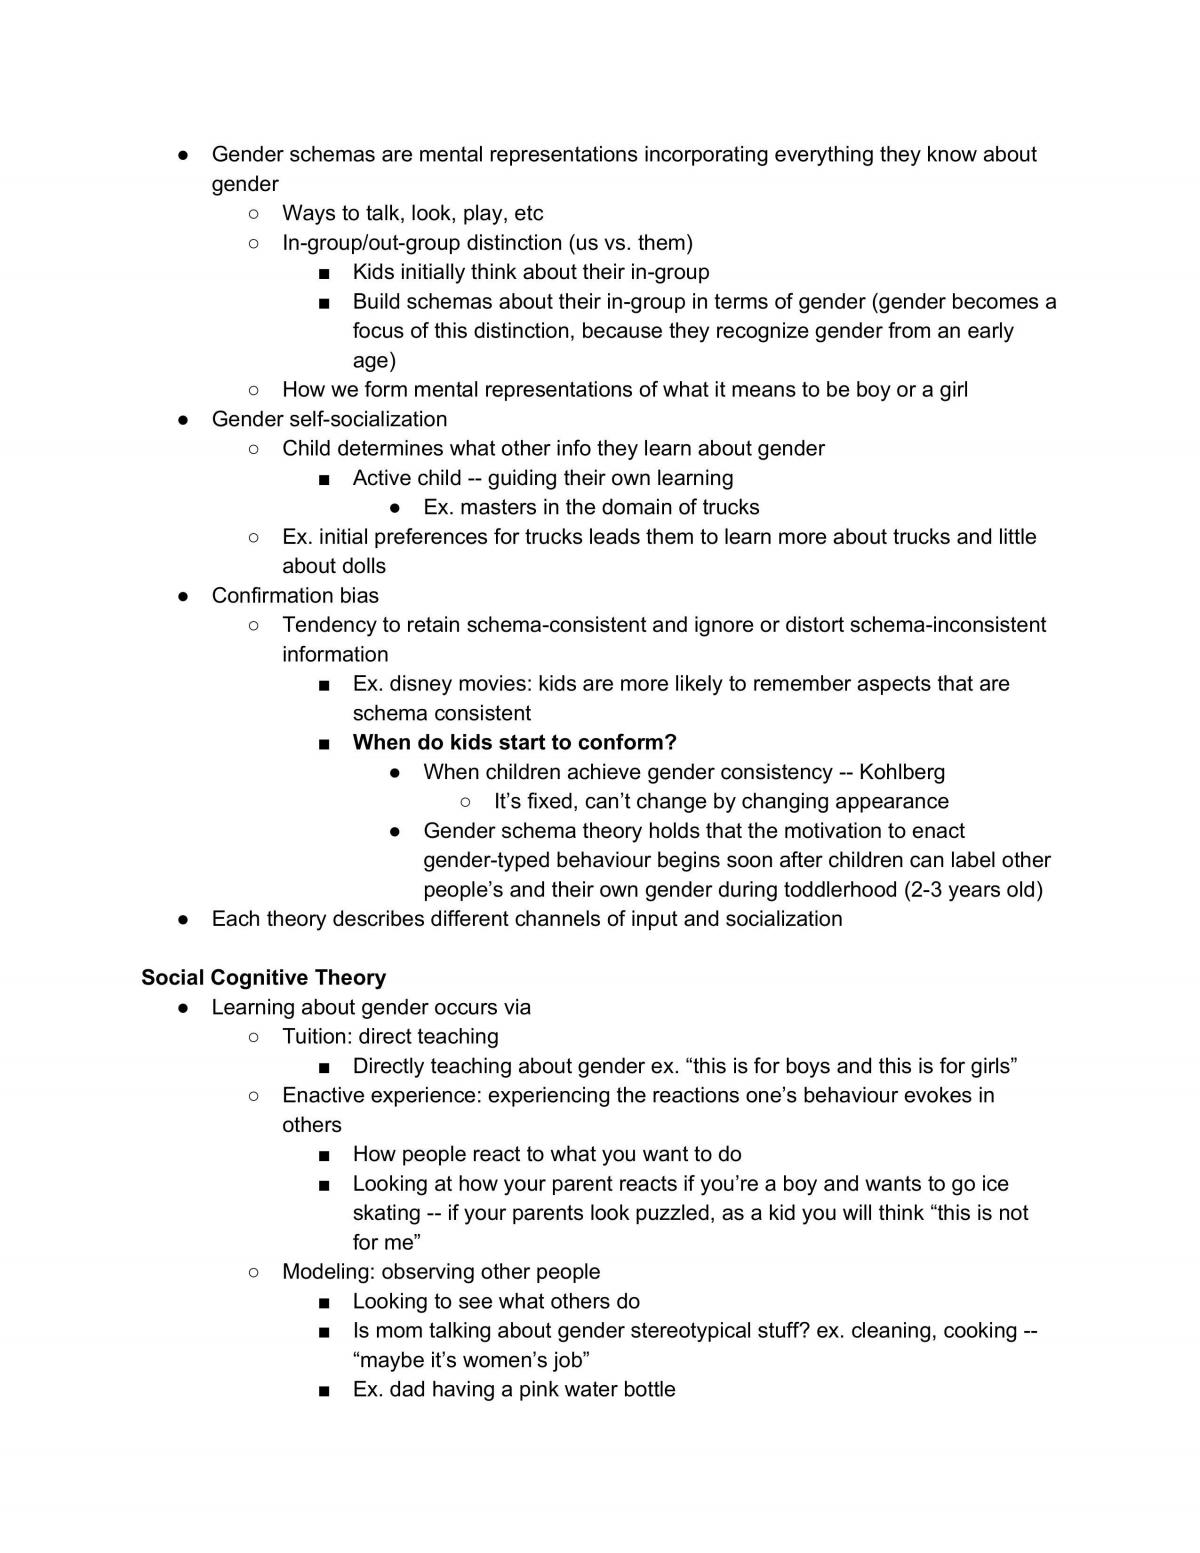 Childhood and Adolescence Notes - Page 54